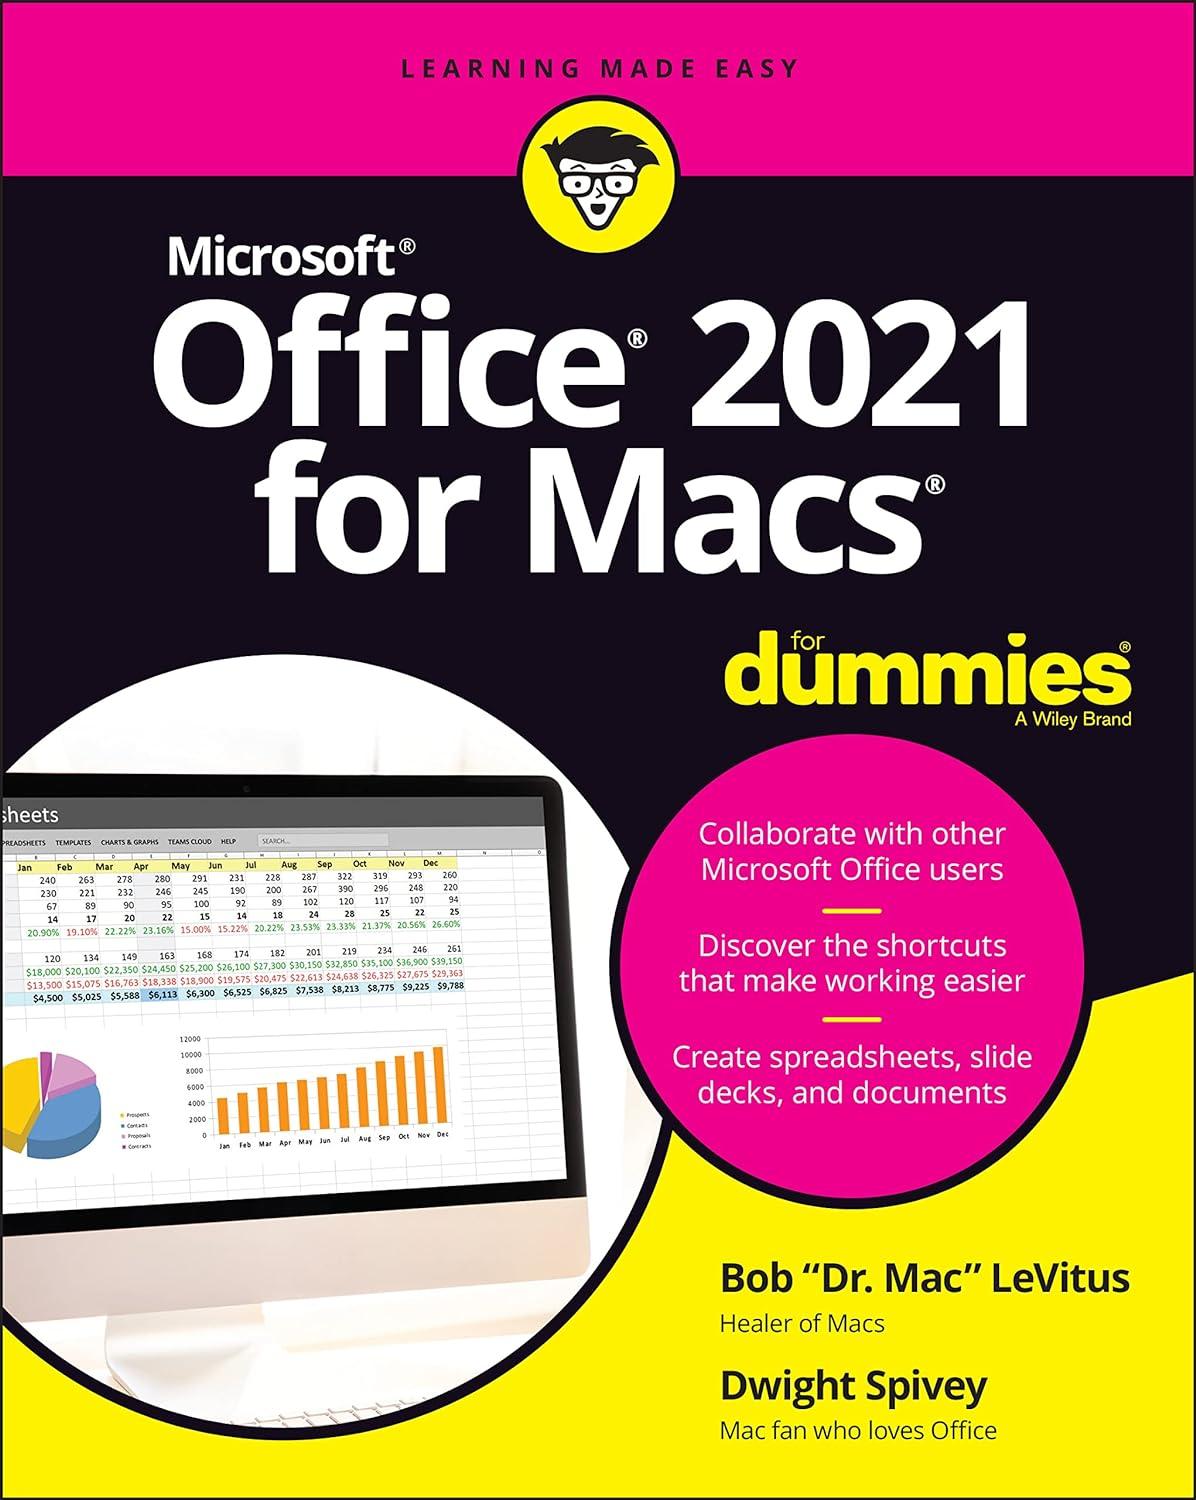 office 2021 for macs for dummies 1st edition bob levitus, dwight spivey 1119840449, 978-1119840442